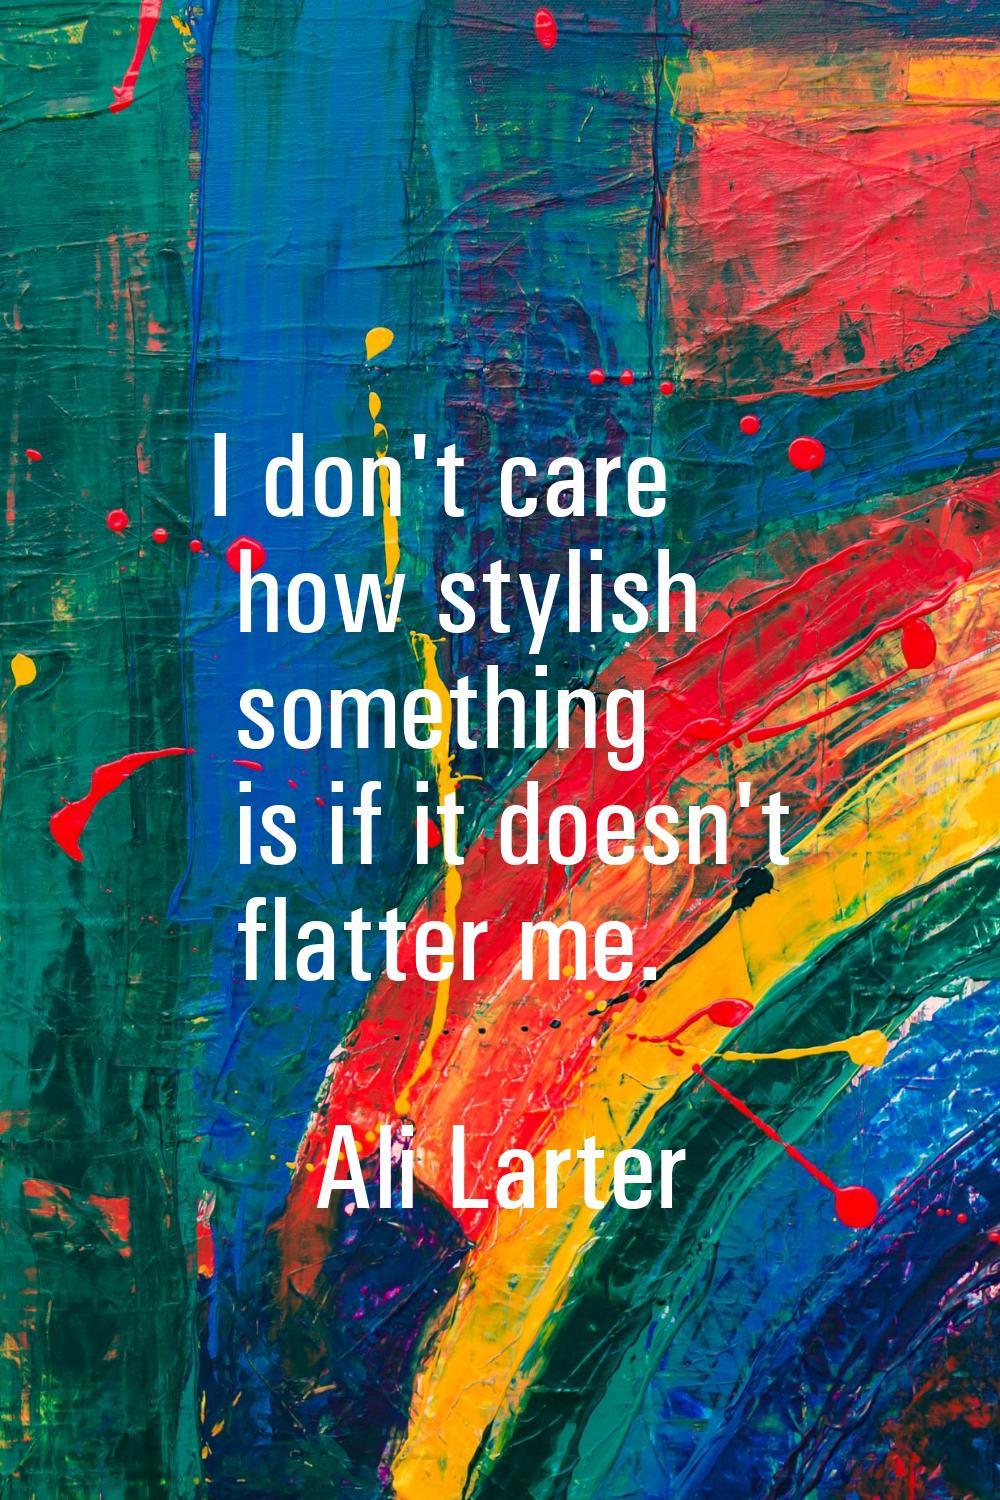 I don't care how stylish something is if it doesn't flatter me.